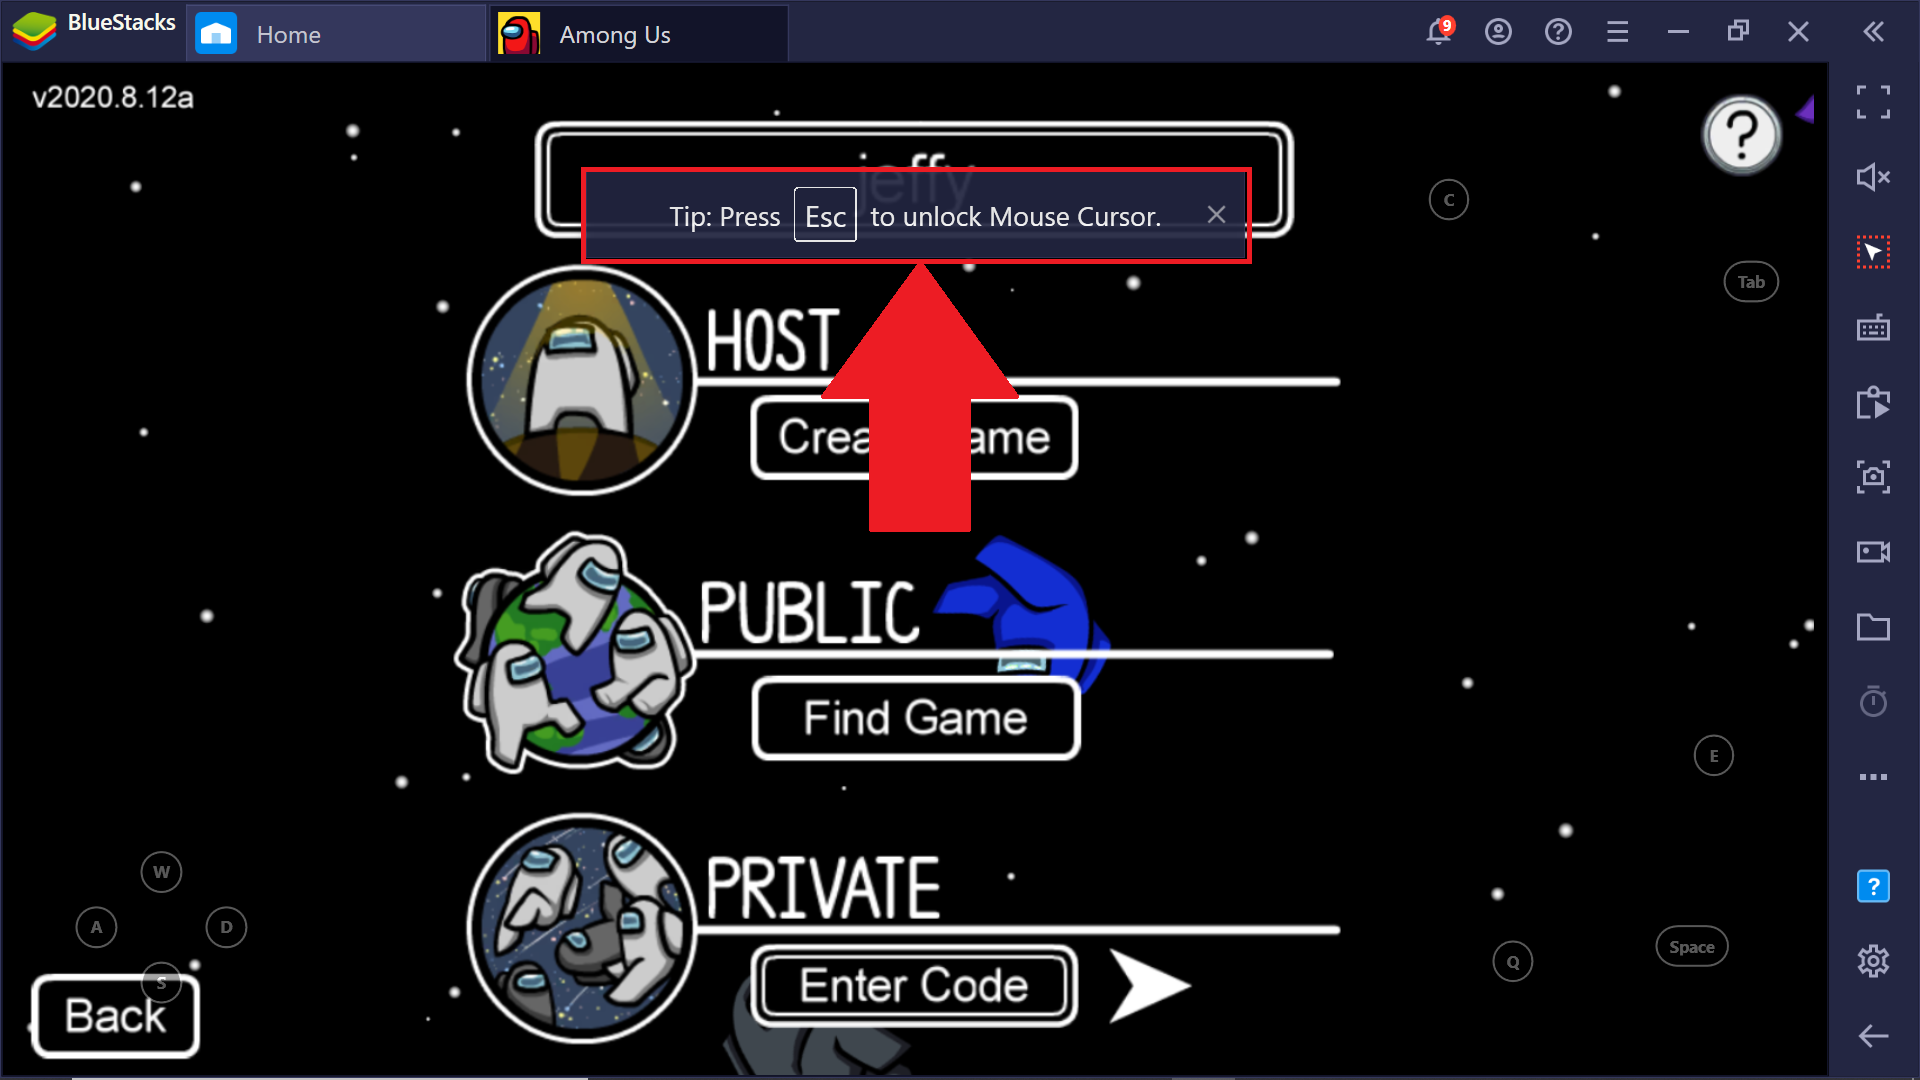 How To Lock Your Cursor Within A Game On Bluestacks 4 Bluestacks Support - roblox custom shift lock cursor